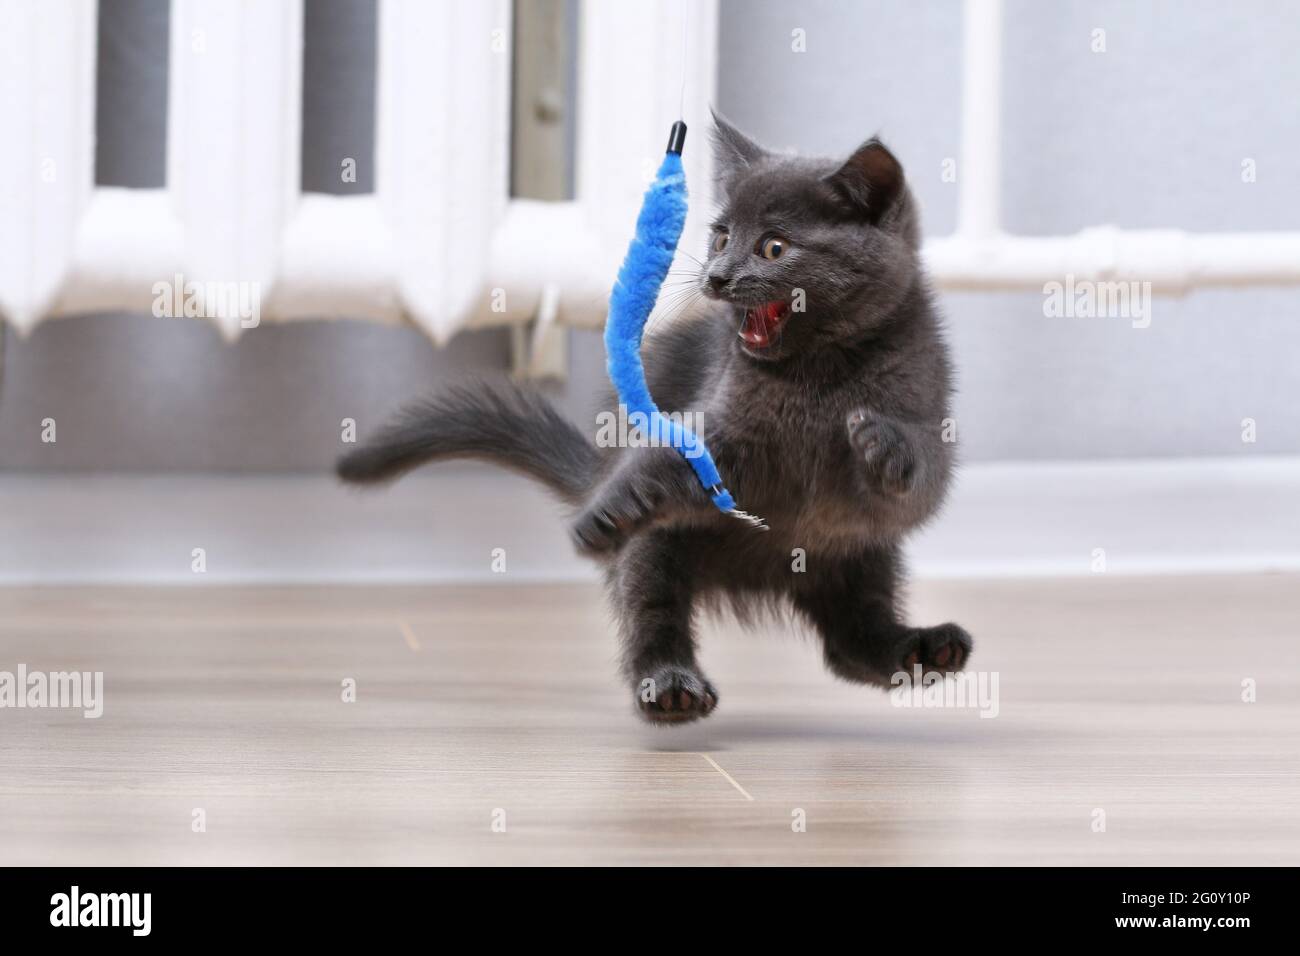 https://c8.alamy.com/comp/2G0Y10P/a-small-gray-kitten-plays-with-a-toy-on-a-fishing-rod-cat-toys-2G0Y10P.jpg